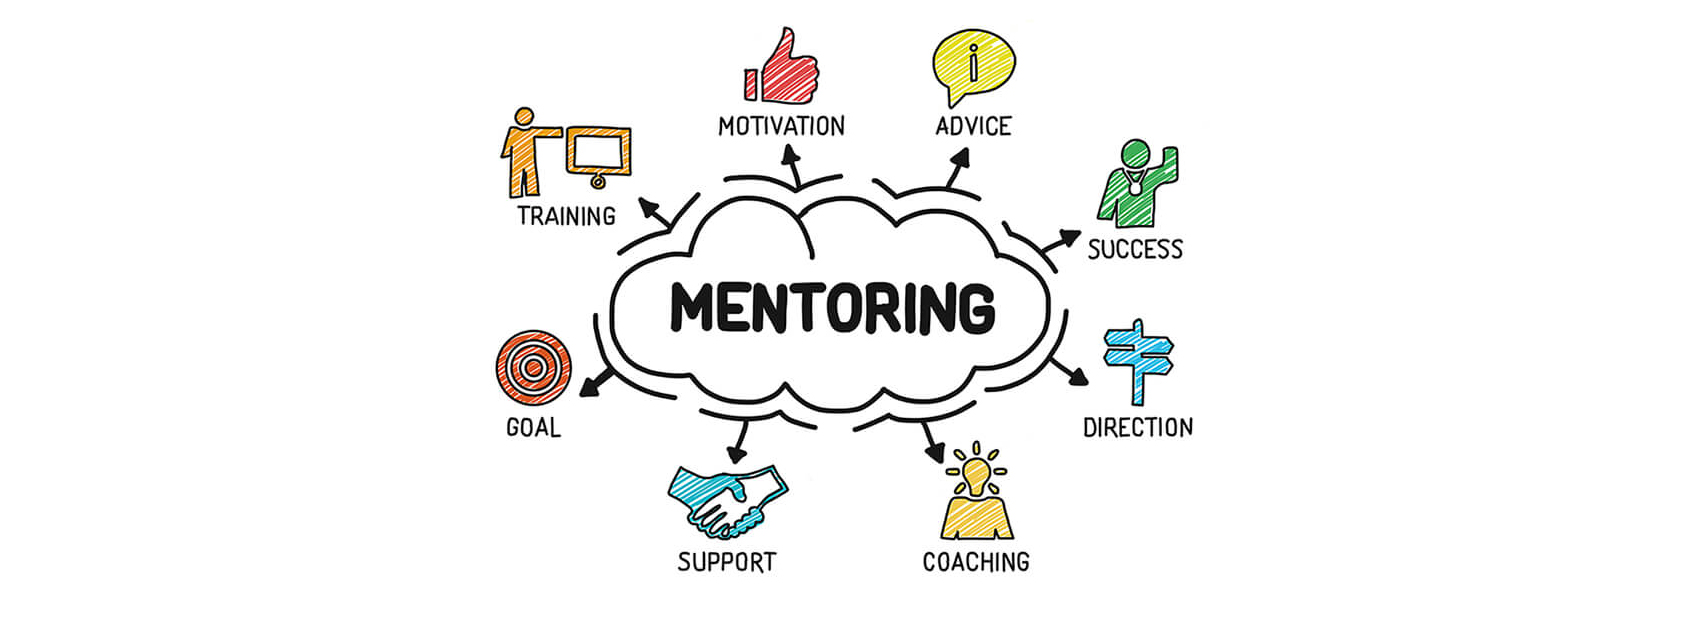 Reasons You Need A Mentor To Succeed As An Entrepreneur,Startup Stories,Featured,Reasons To Succeess An Entrepreneur,How To Become a Succeess Entrepreneur,Reasons You Need A Mentor,Entrepreneur,Ideal Mentor,Key Words For Entrepreneur,Qualities of a Good Mentor